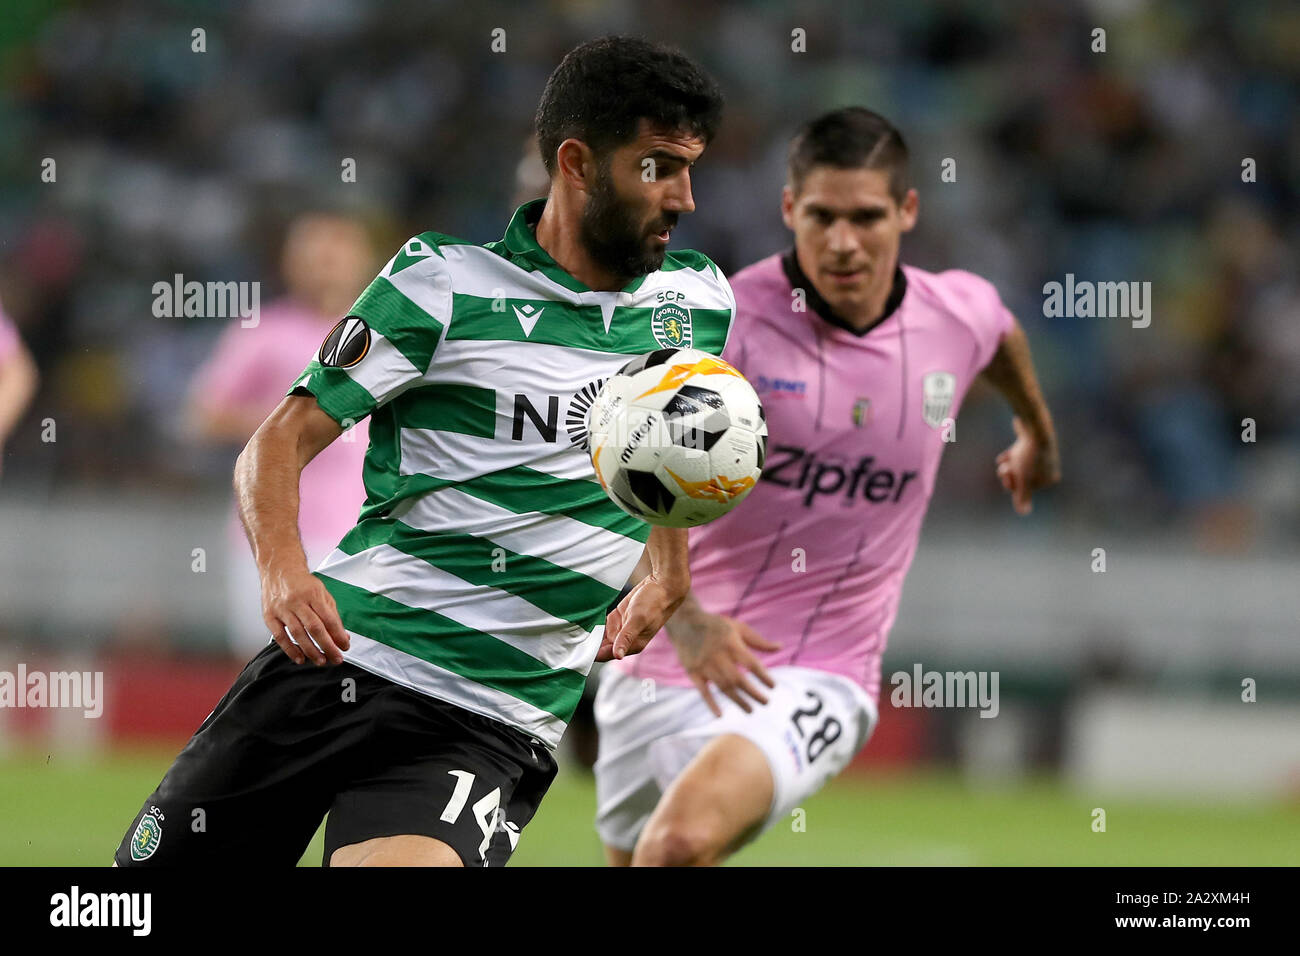 Lisbon, Portugal. 3rd Oct, 2019. Luis Neto (L) of Sporting CP vies with Dominik Frieser of LASK Linz during the UEFA Europa League group D match between Sporting CP and LASK Linz in Lisbon, Portugal, on October 3, 2019. Credit: Pedro Fiuza/Xinhua/Alamy Live News Stock Photo